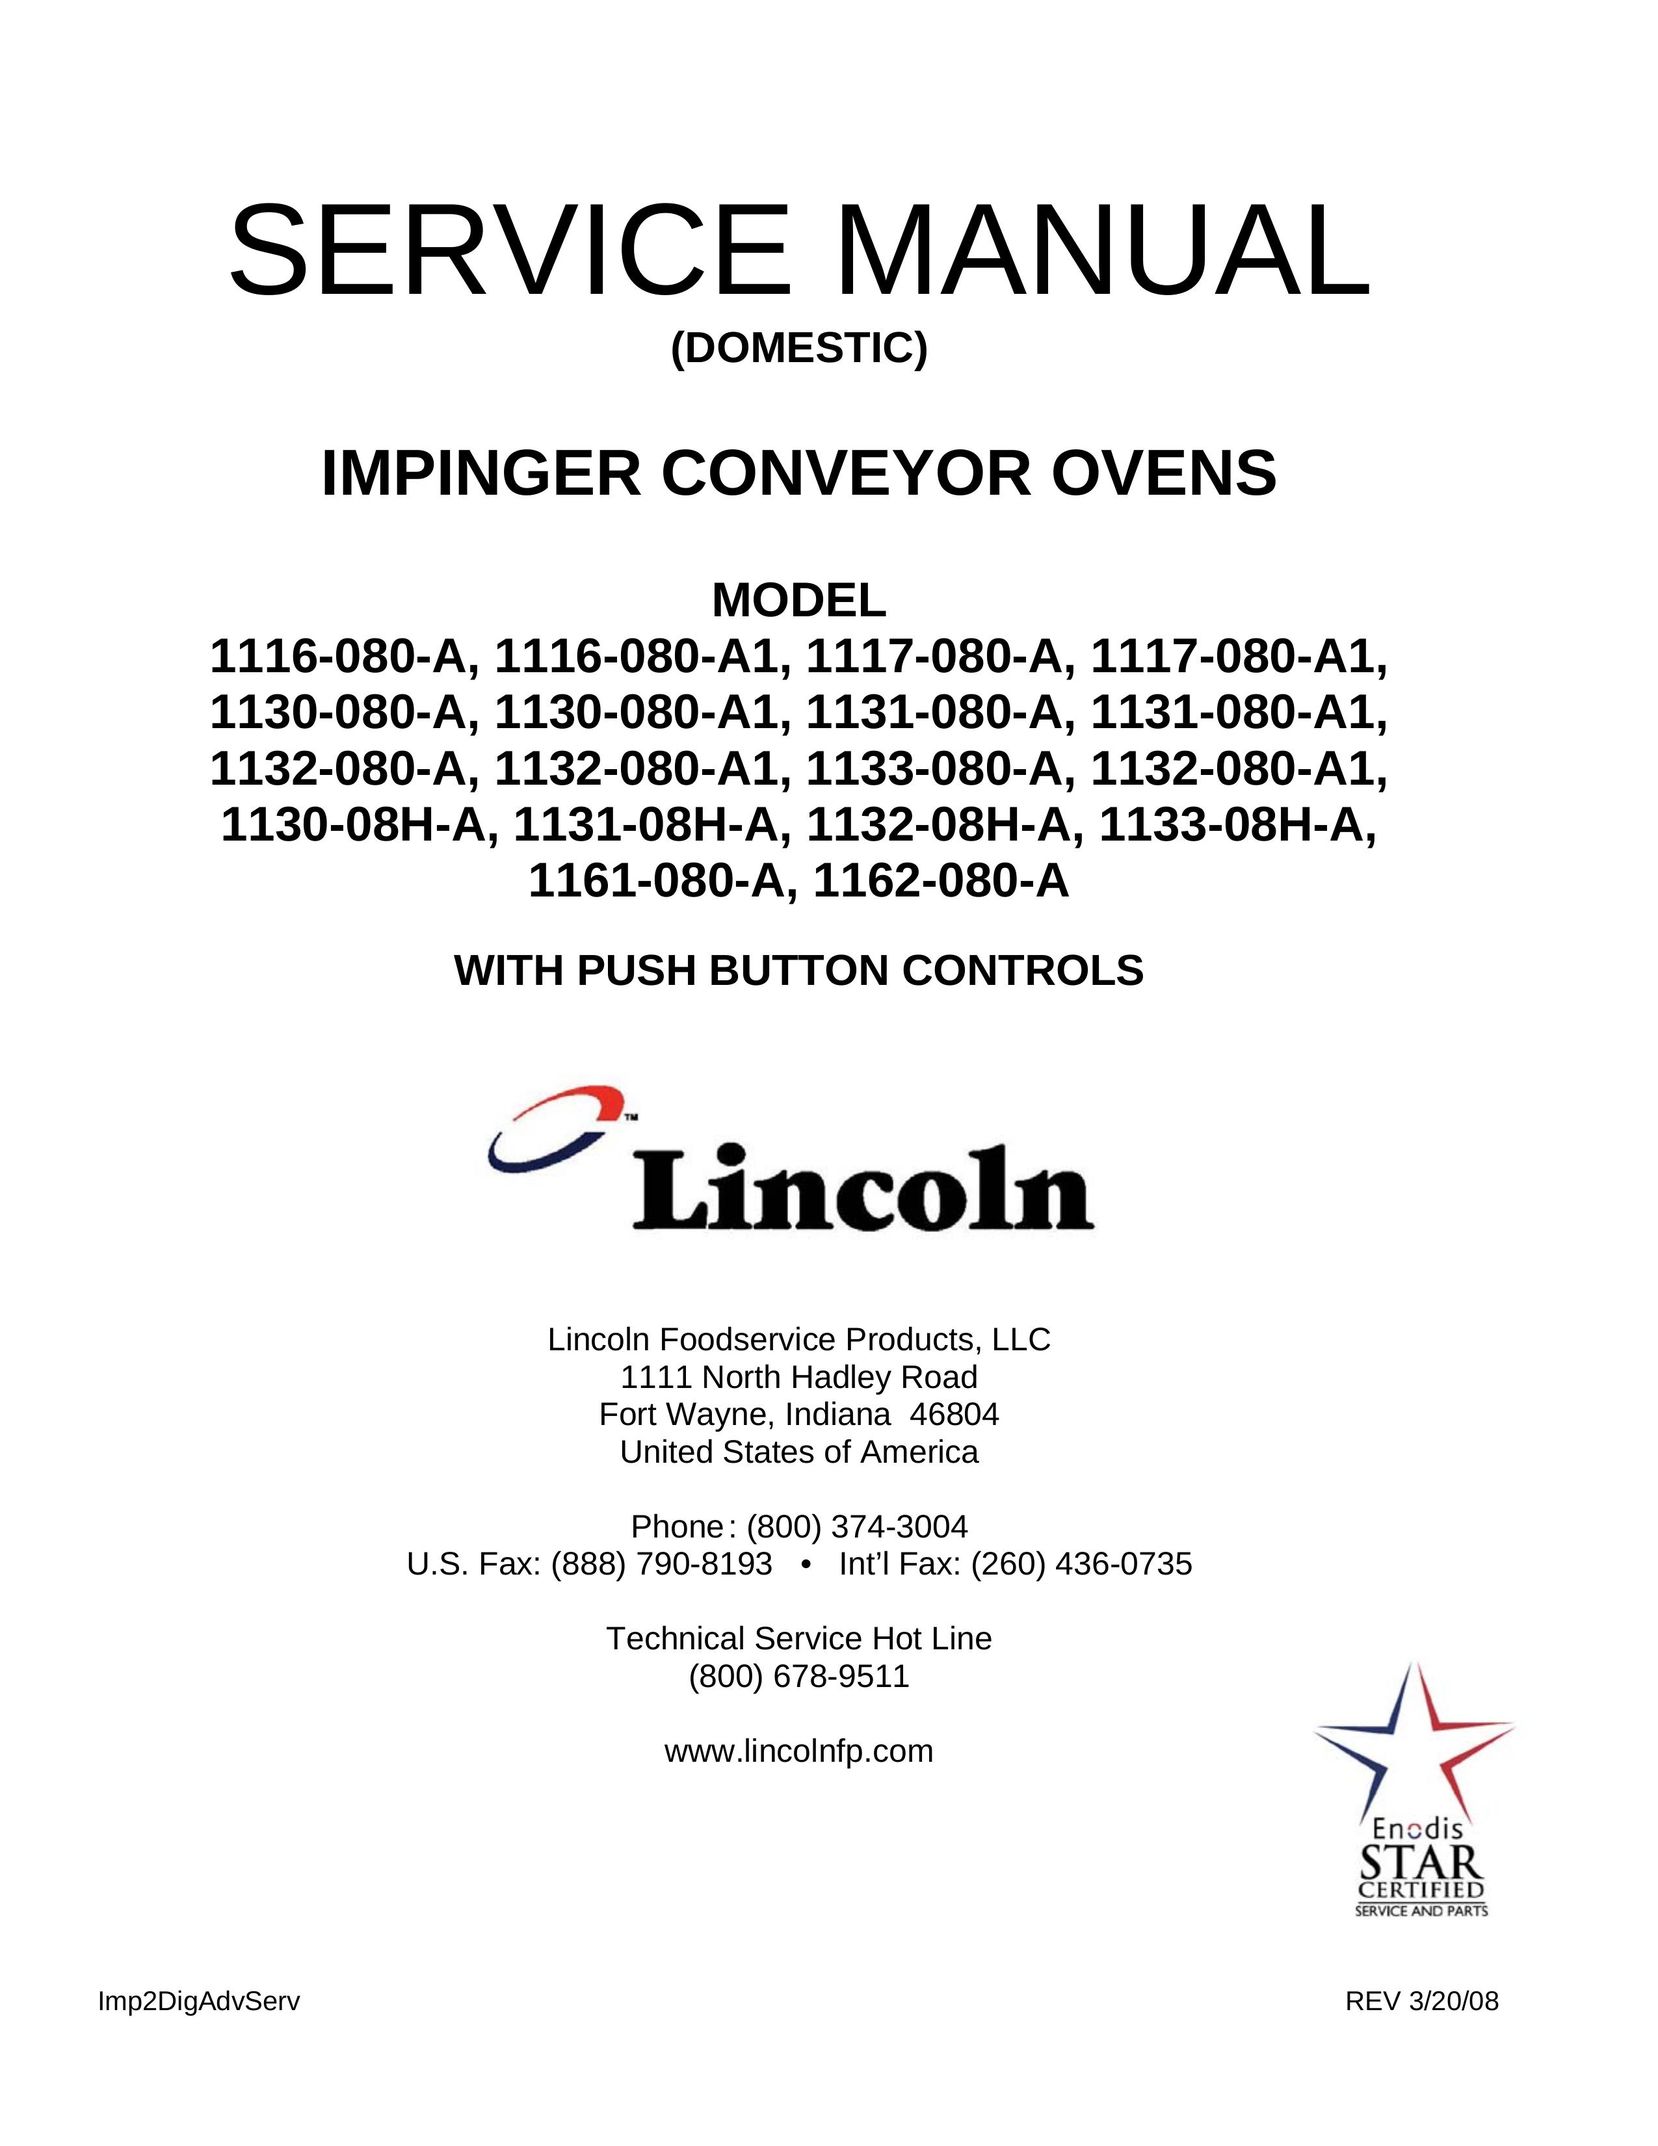 Lincoln 1132-08H-A Convection Oven User Manual